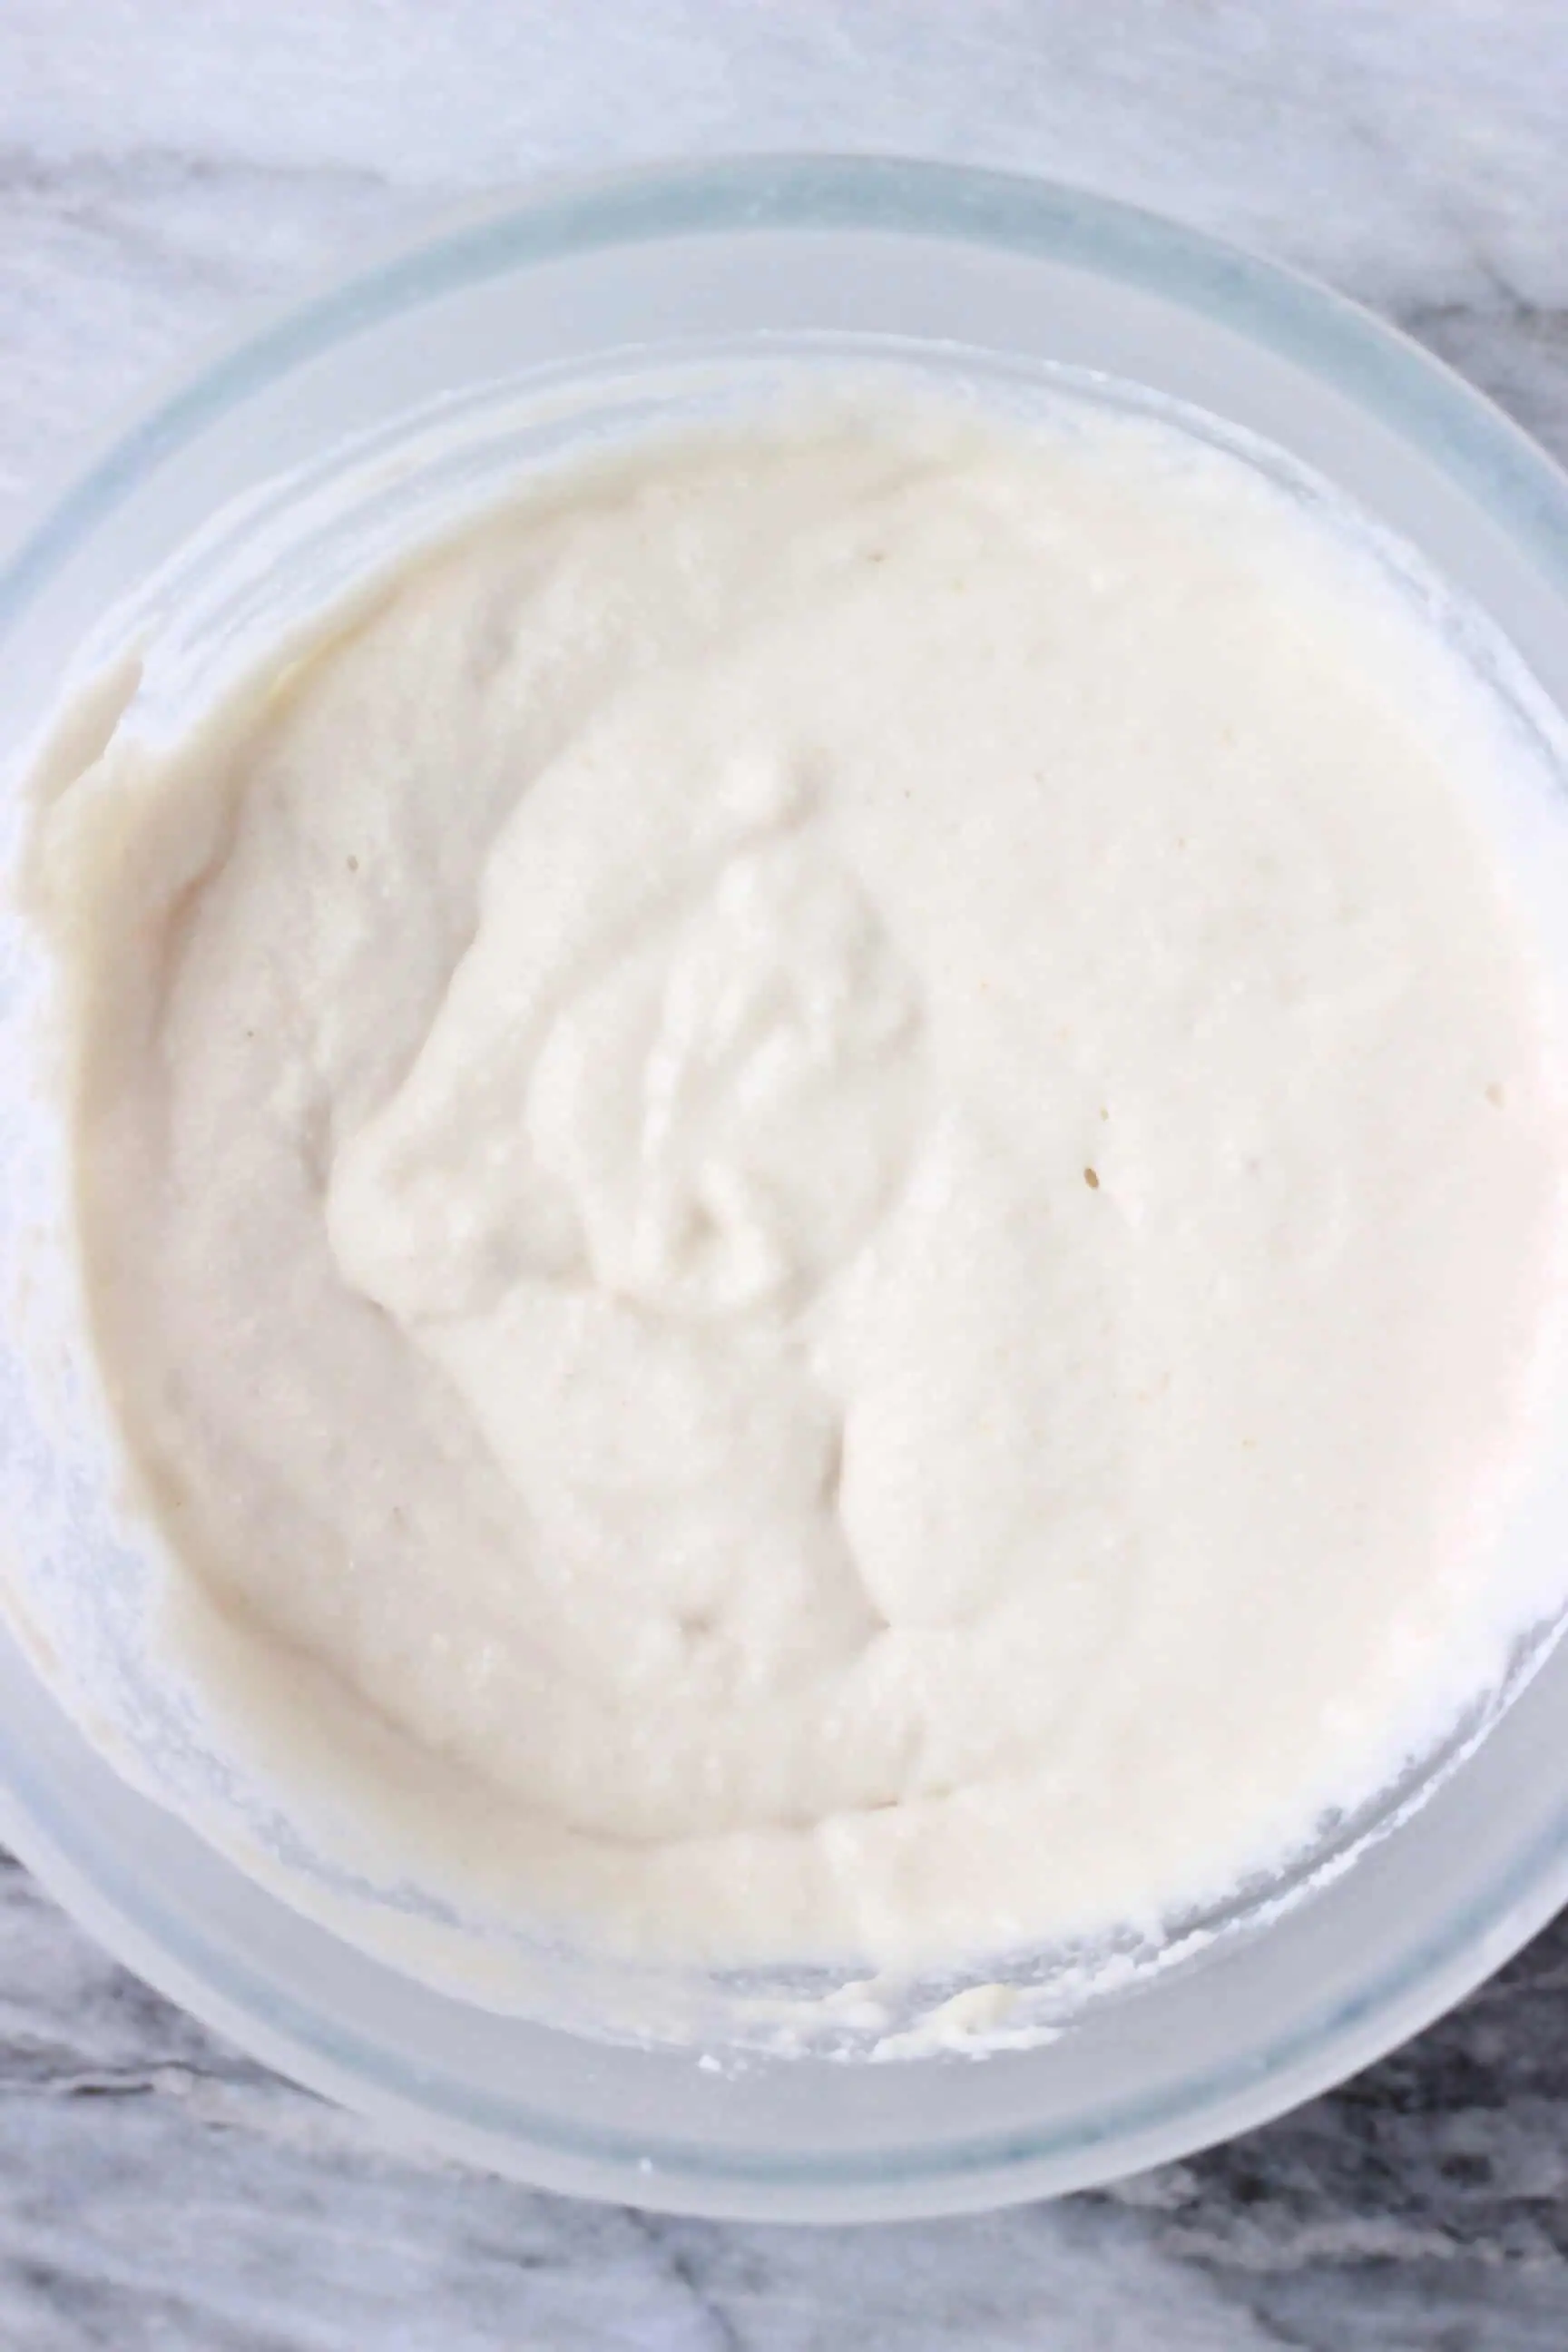 Raw white vegan coconut flour pancake batter in a glass mixing bowl against a marble background